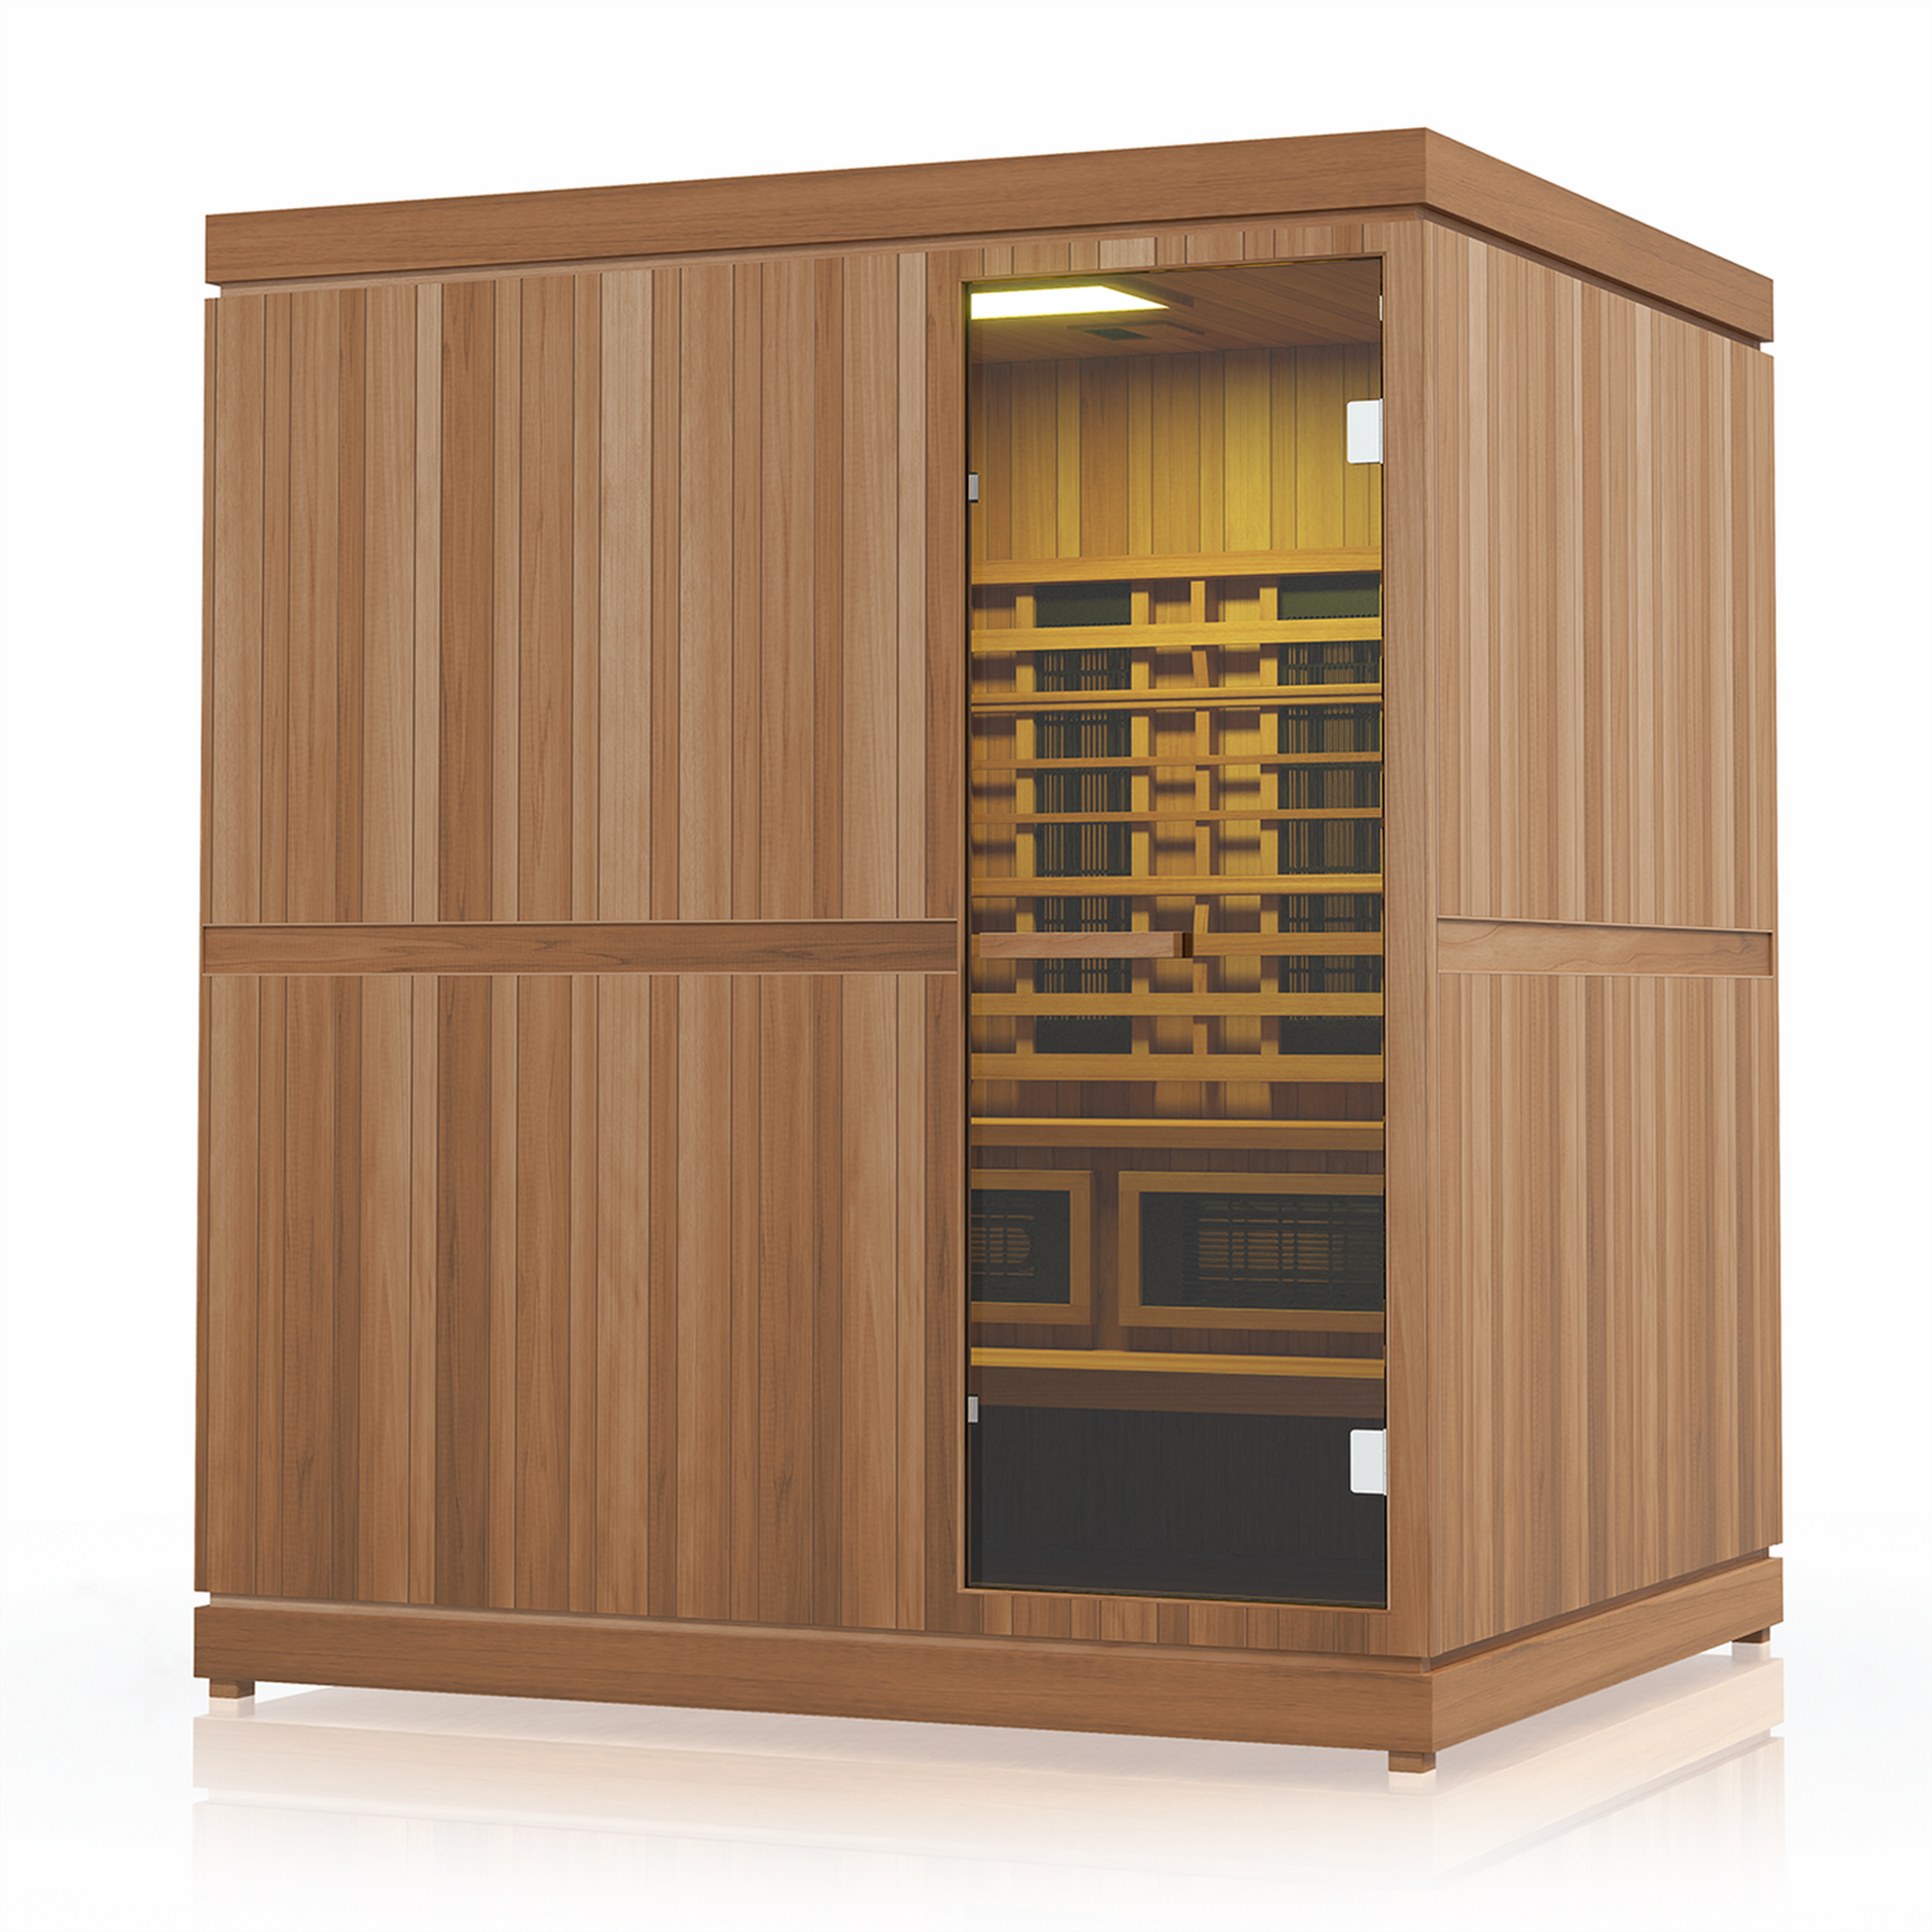 Finnmark Designs FD-5 Trinity XL 72" 4-Person Home Infrared & Steam Sauna Combo With Infrared & Traditional Heater